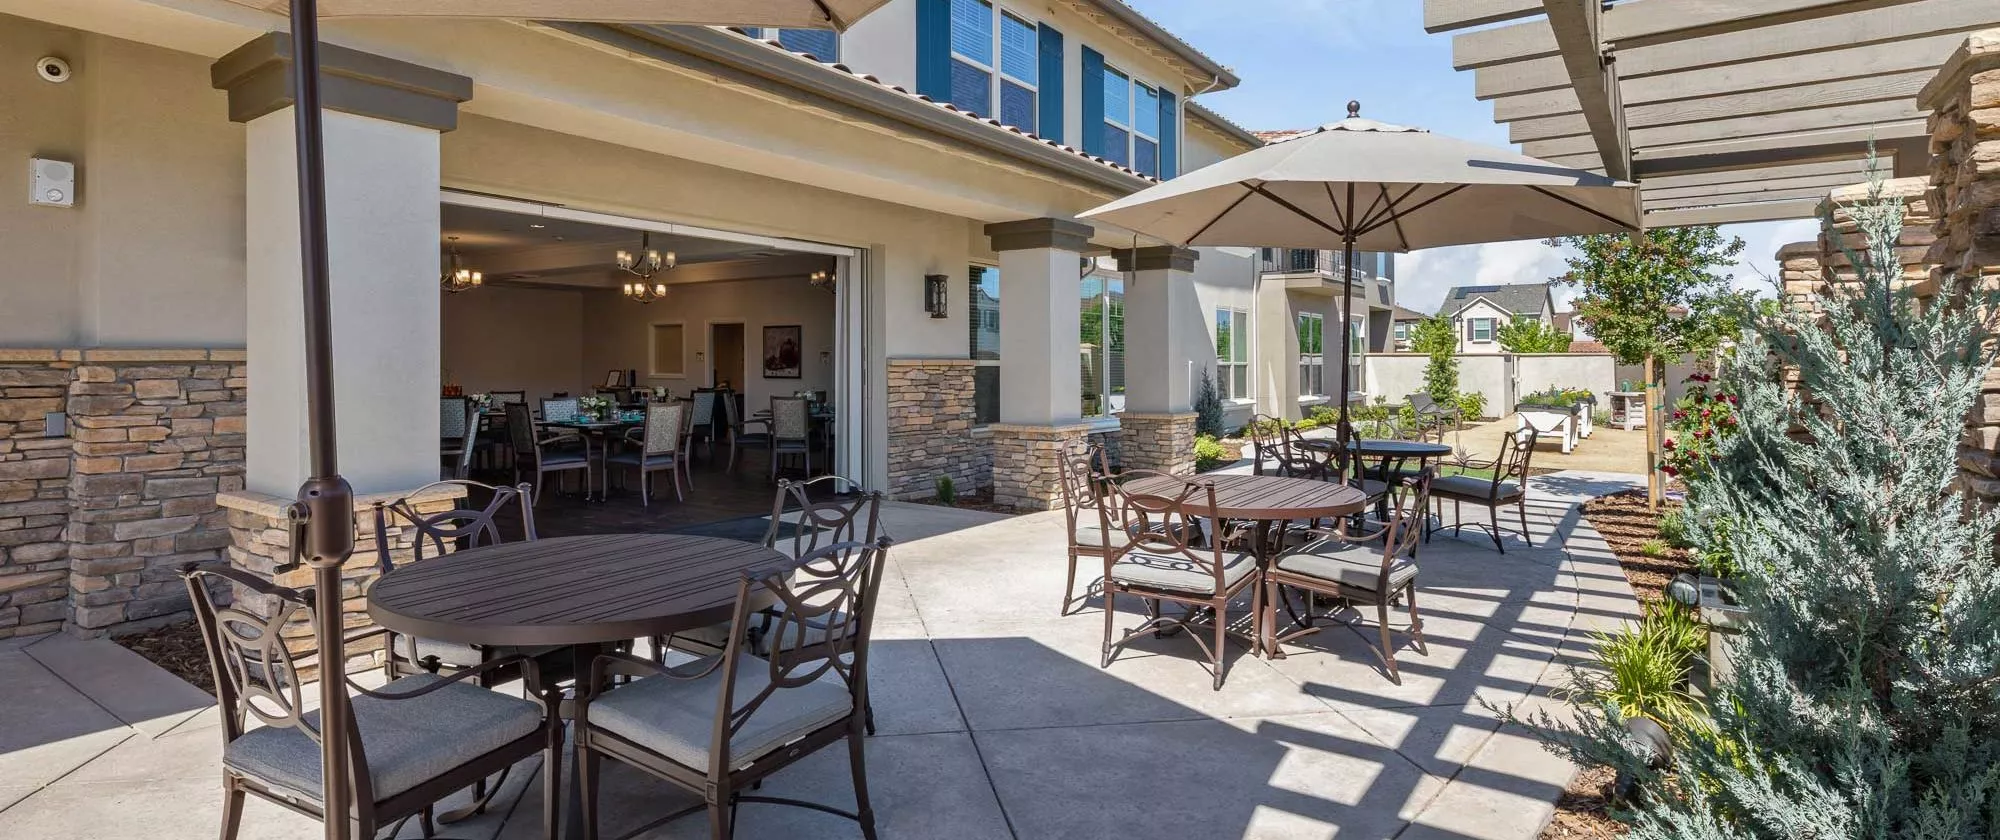 Westpark patio with dining tables and chairs and umbrellas